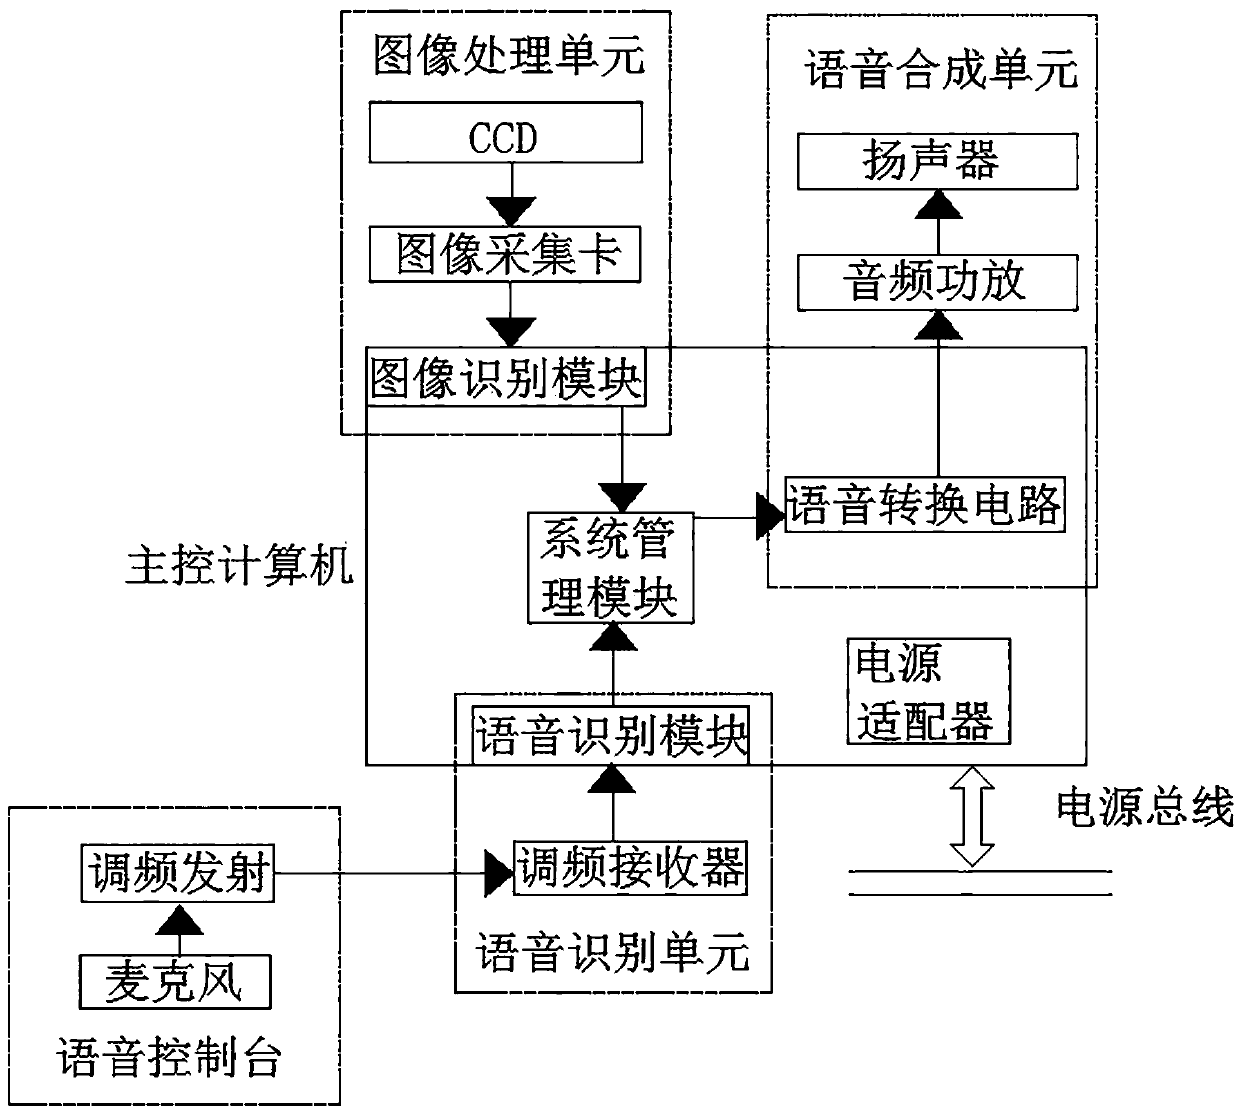 Distributed control system of intelligent robot